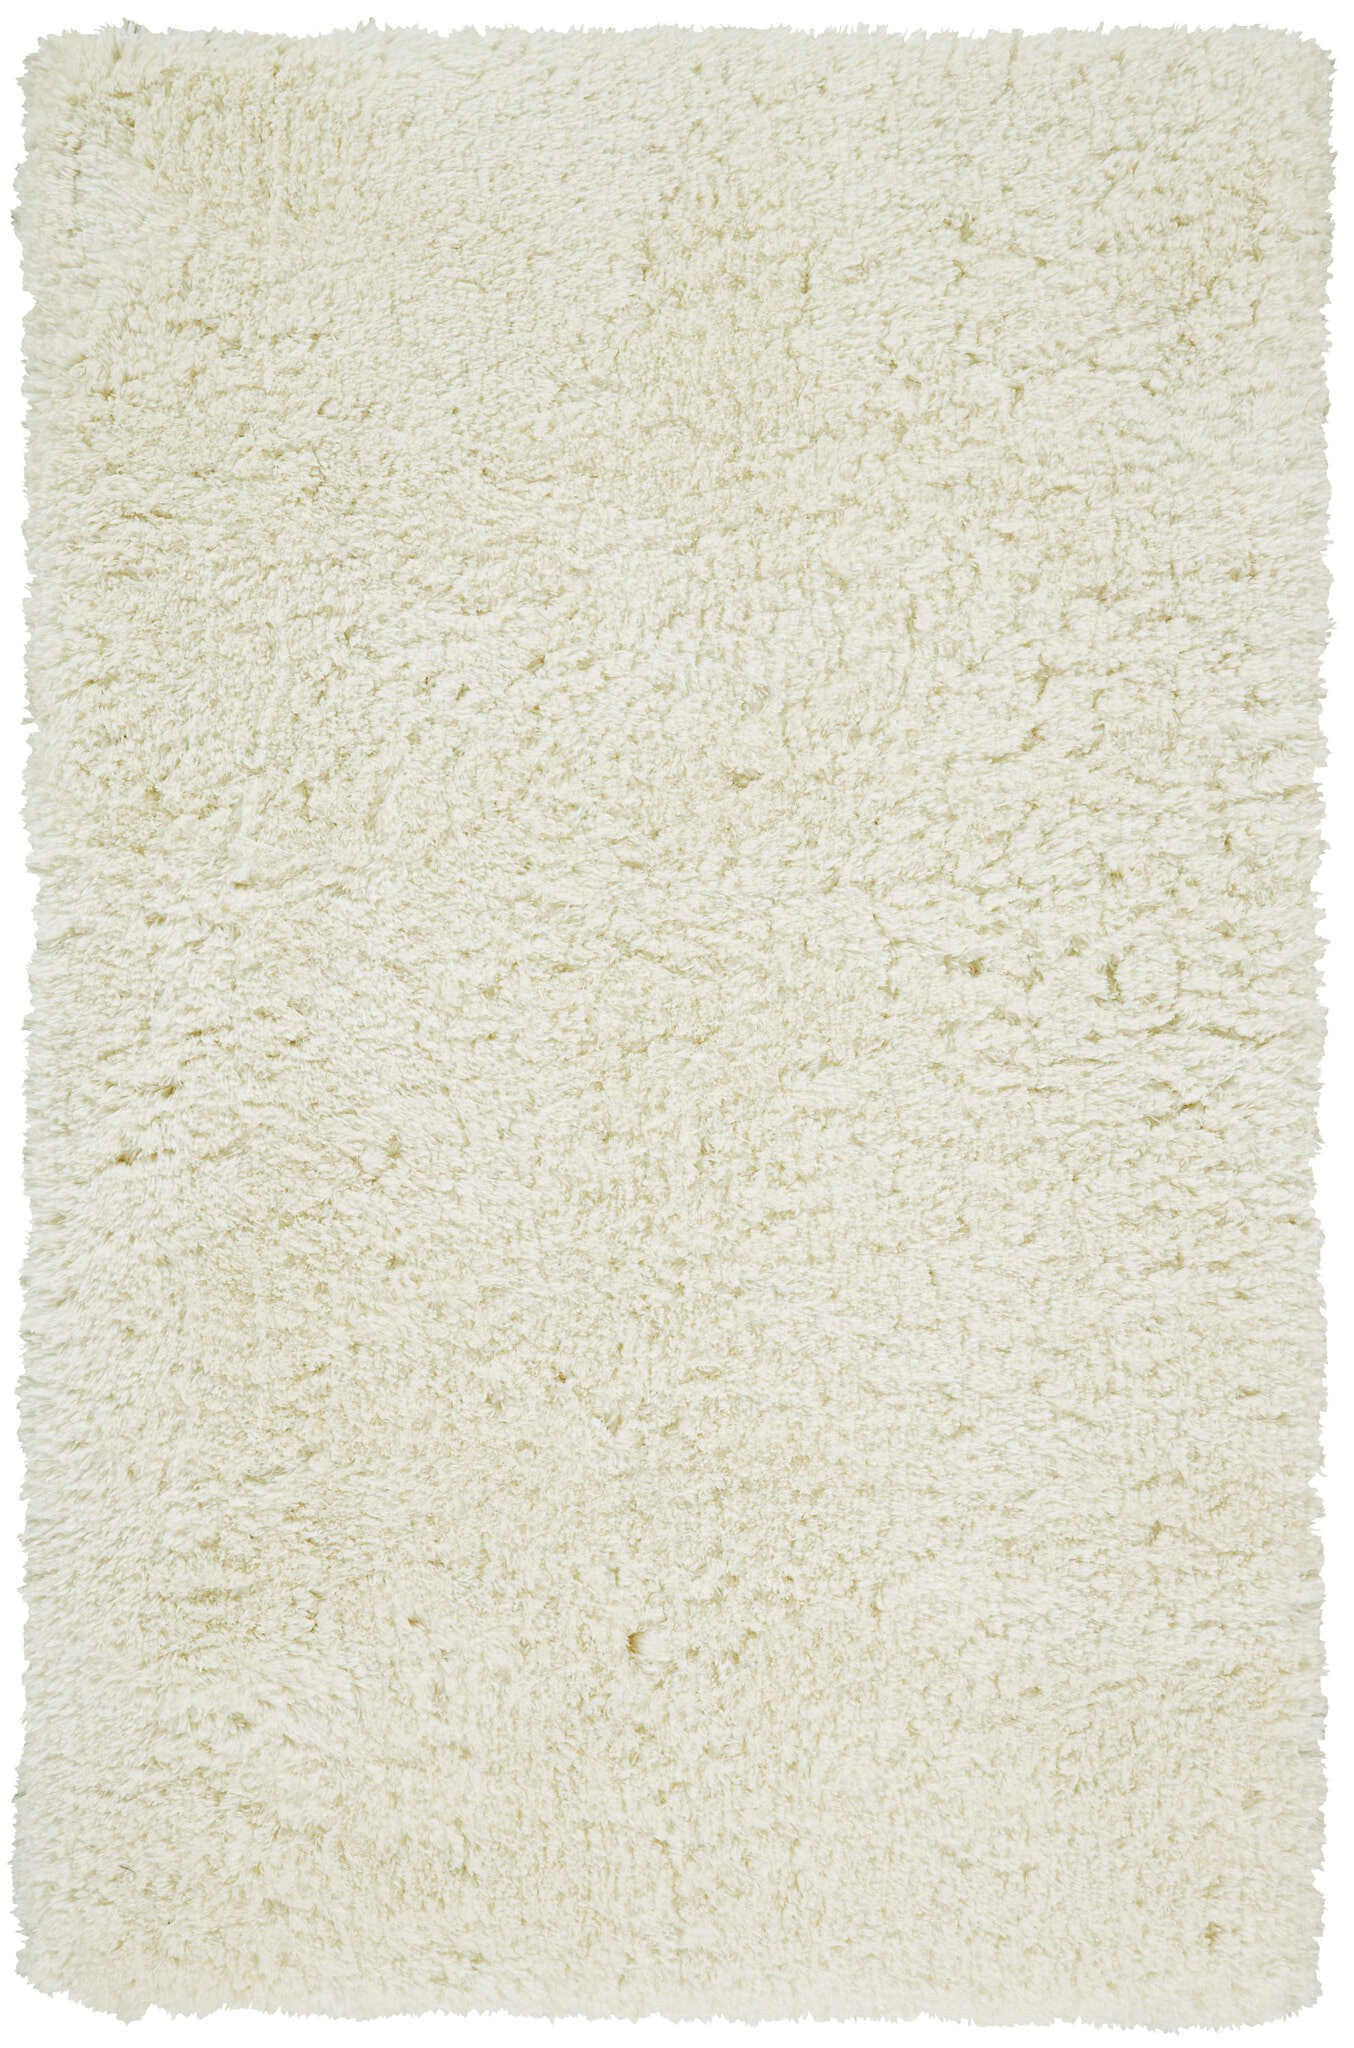 2' X 3' Ivory And White Shag Tufted Handmade Stain Resistant Area Rug-511128-1